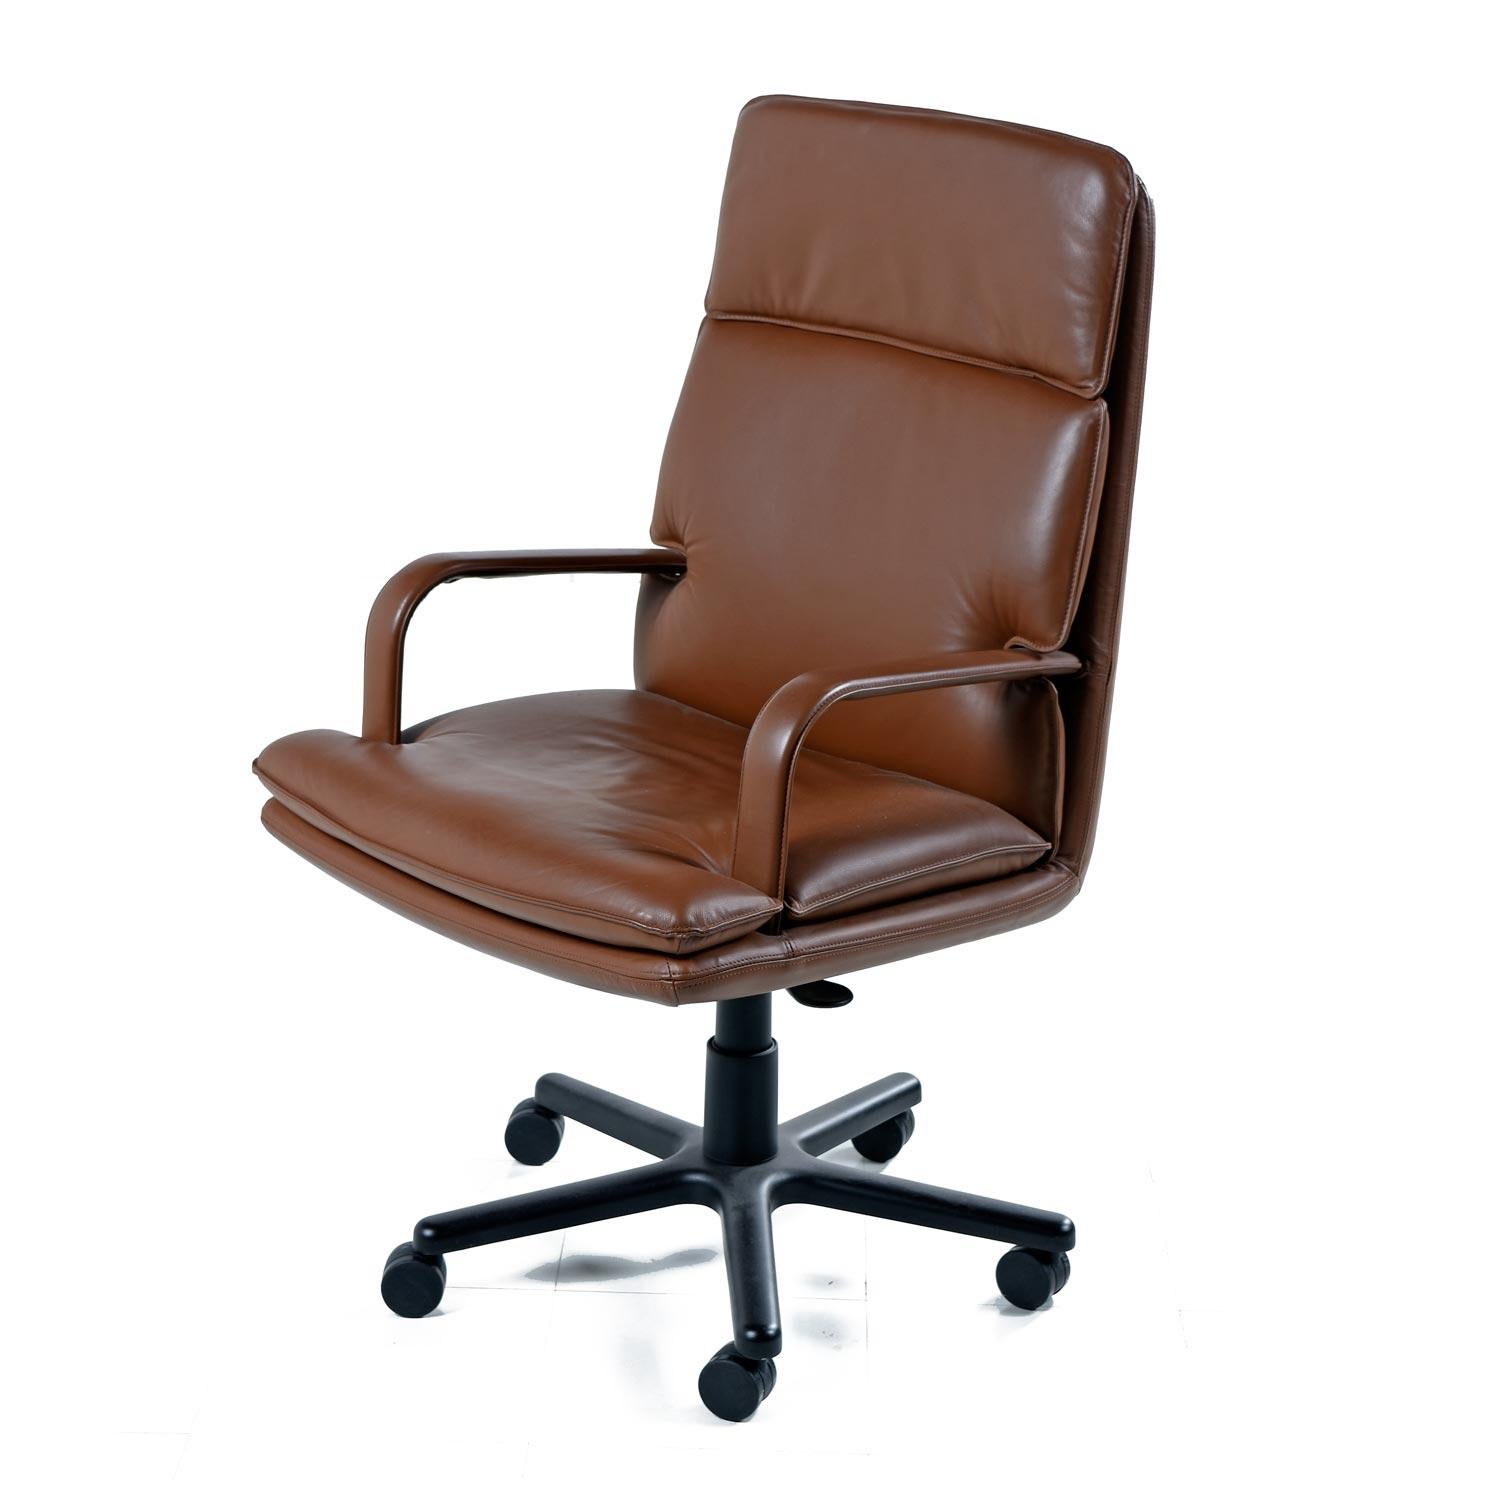 This line debuted in the late 1970s. Each chair is on casters and feature authentic, original, leather upholstery in very good condition. Interestingly, this chair was featured in the movie BIG (1988) with Tom Hanks. The (10, sold separately) we’re